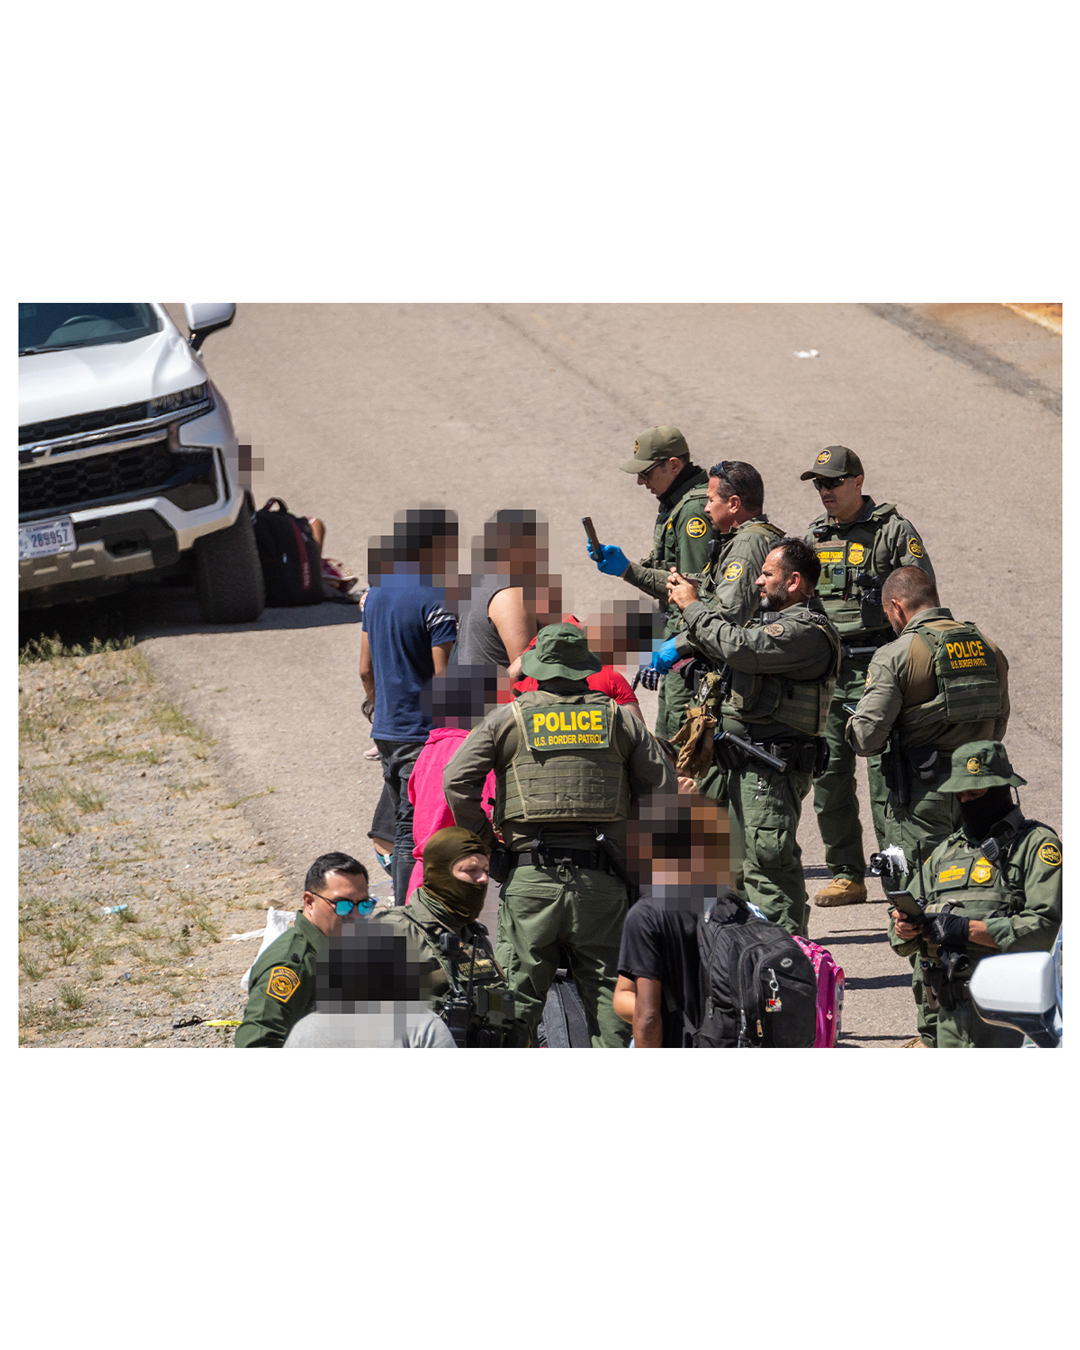 A large group of border patrol agents stand in front of a smaller group of migrants; the agents have phones in their hands as they look over the migrants, some holding the phones as though taking pictures. Several agents wear facemasks.